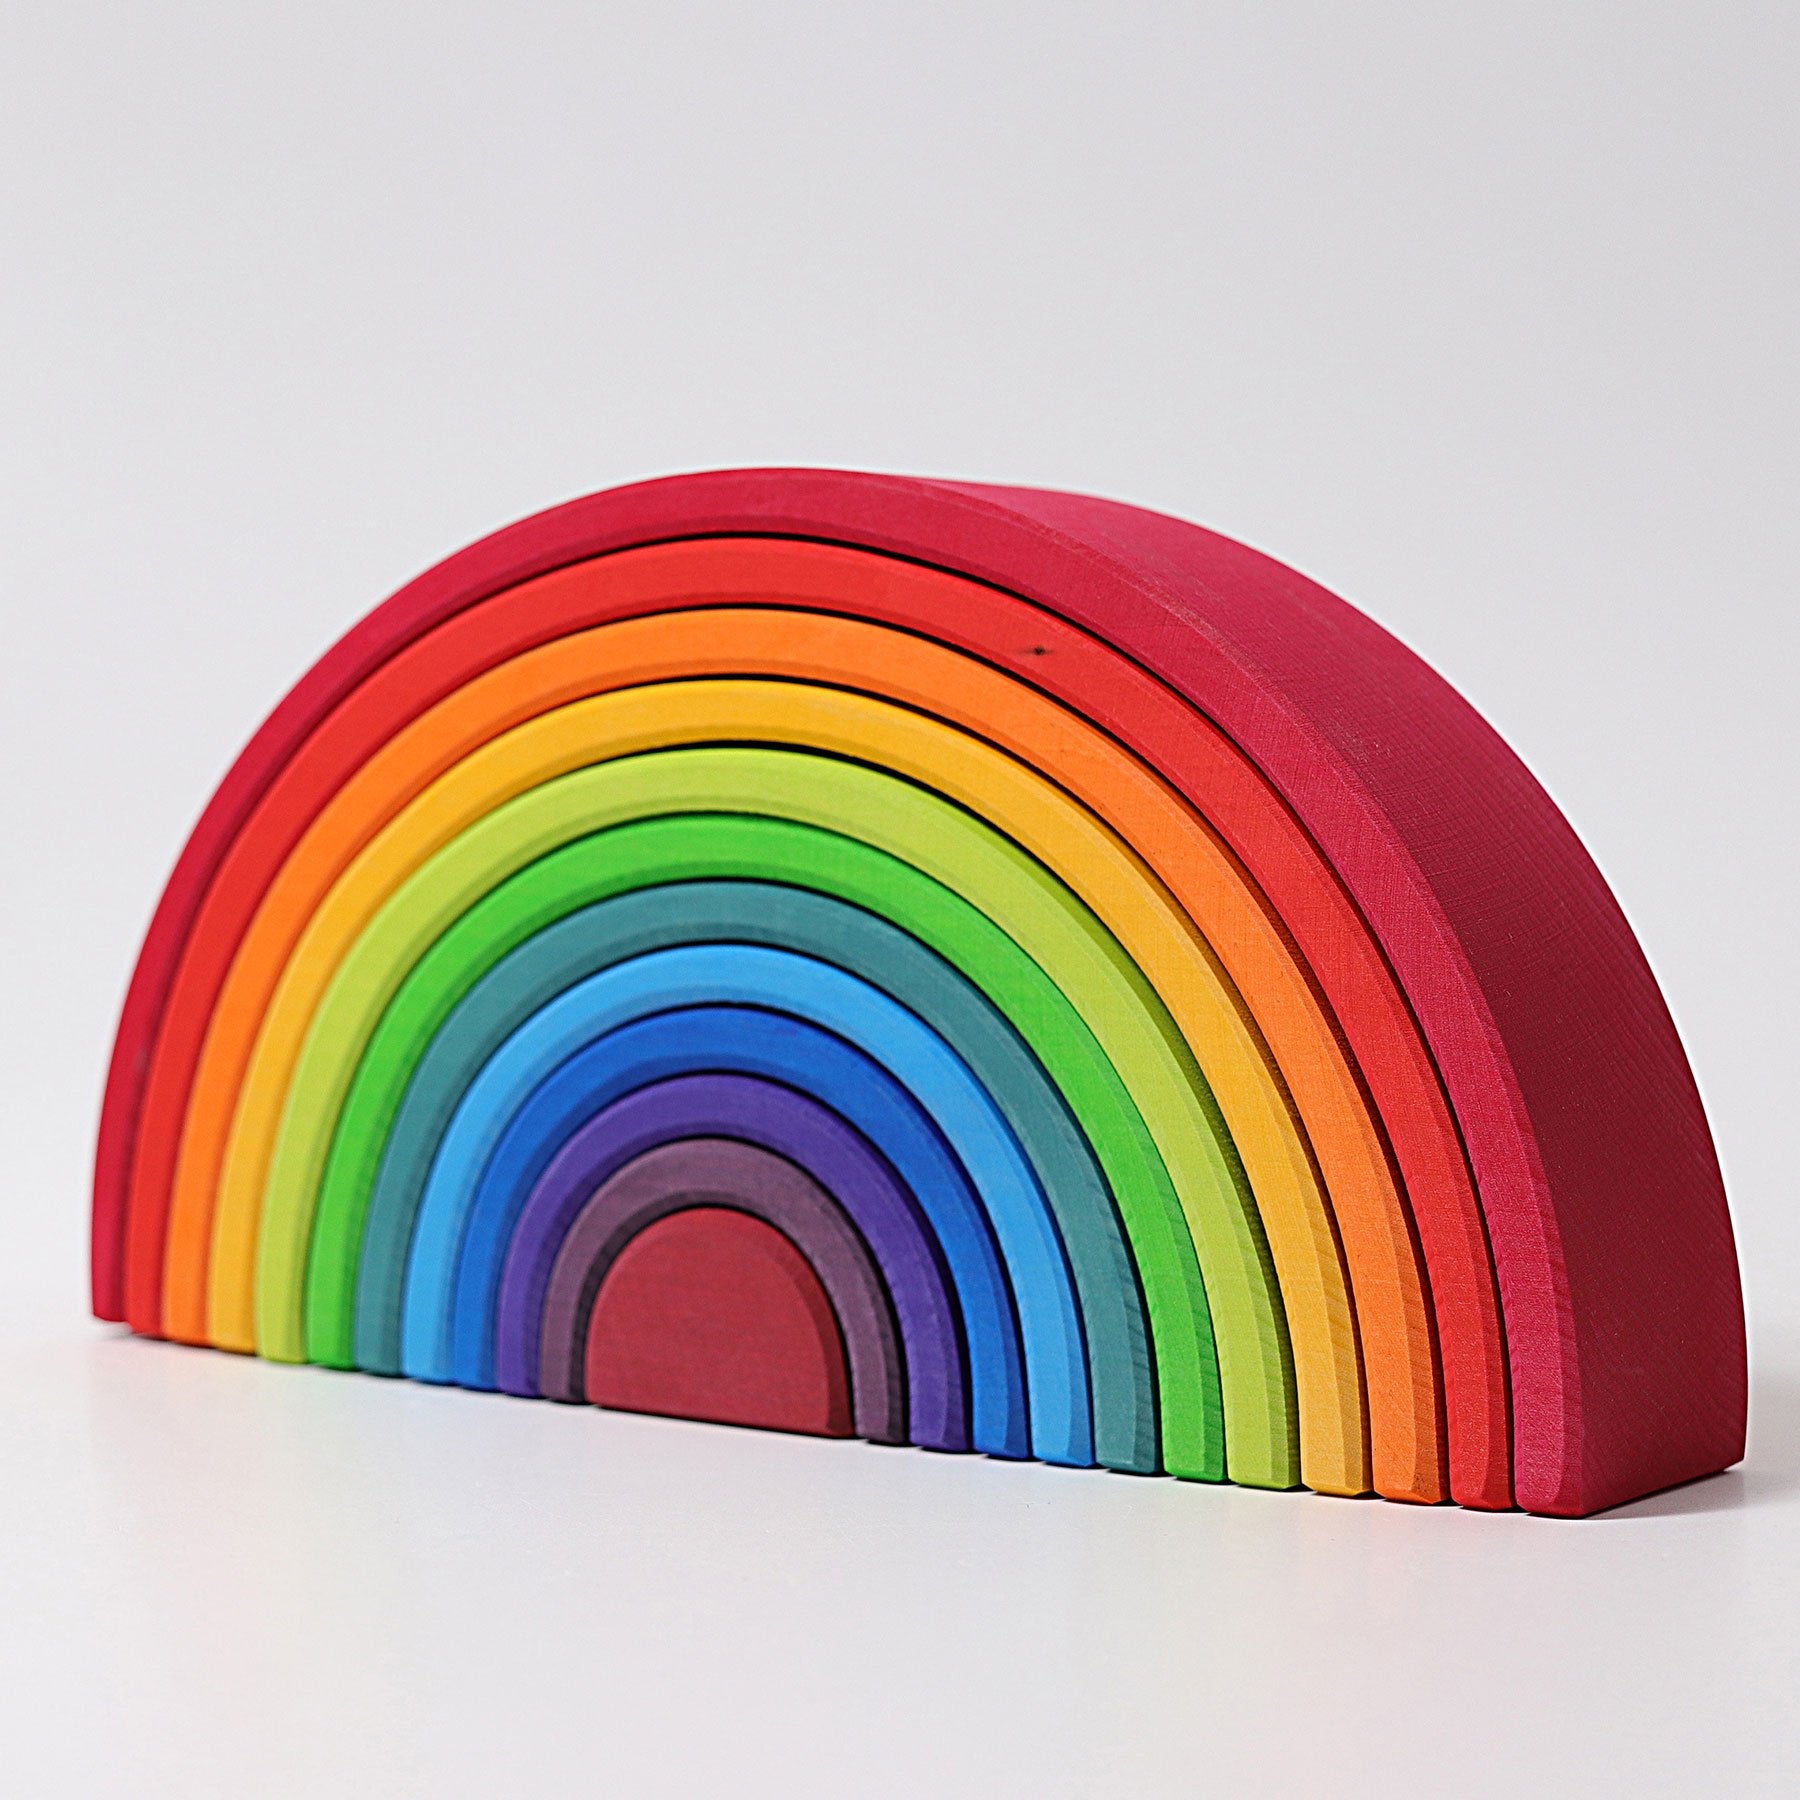 Bright rainbow wooden stacking toy by Grimm's. 